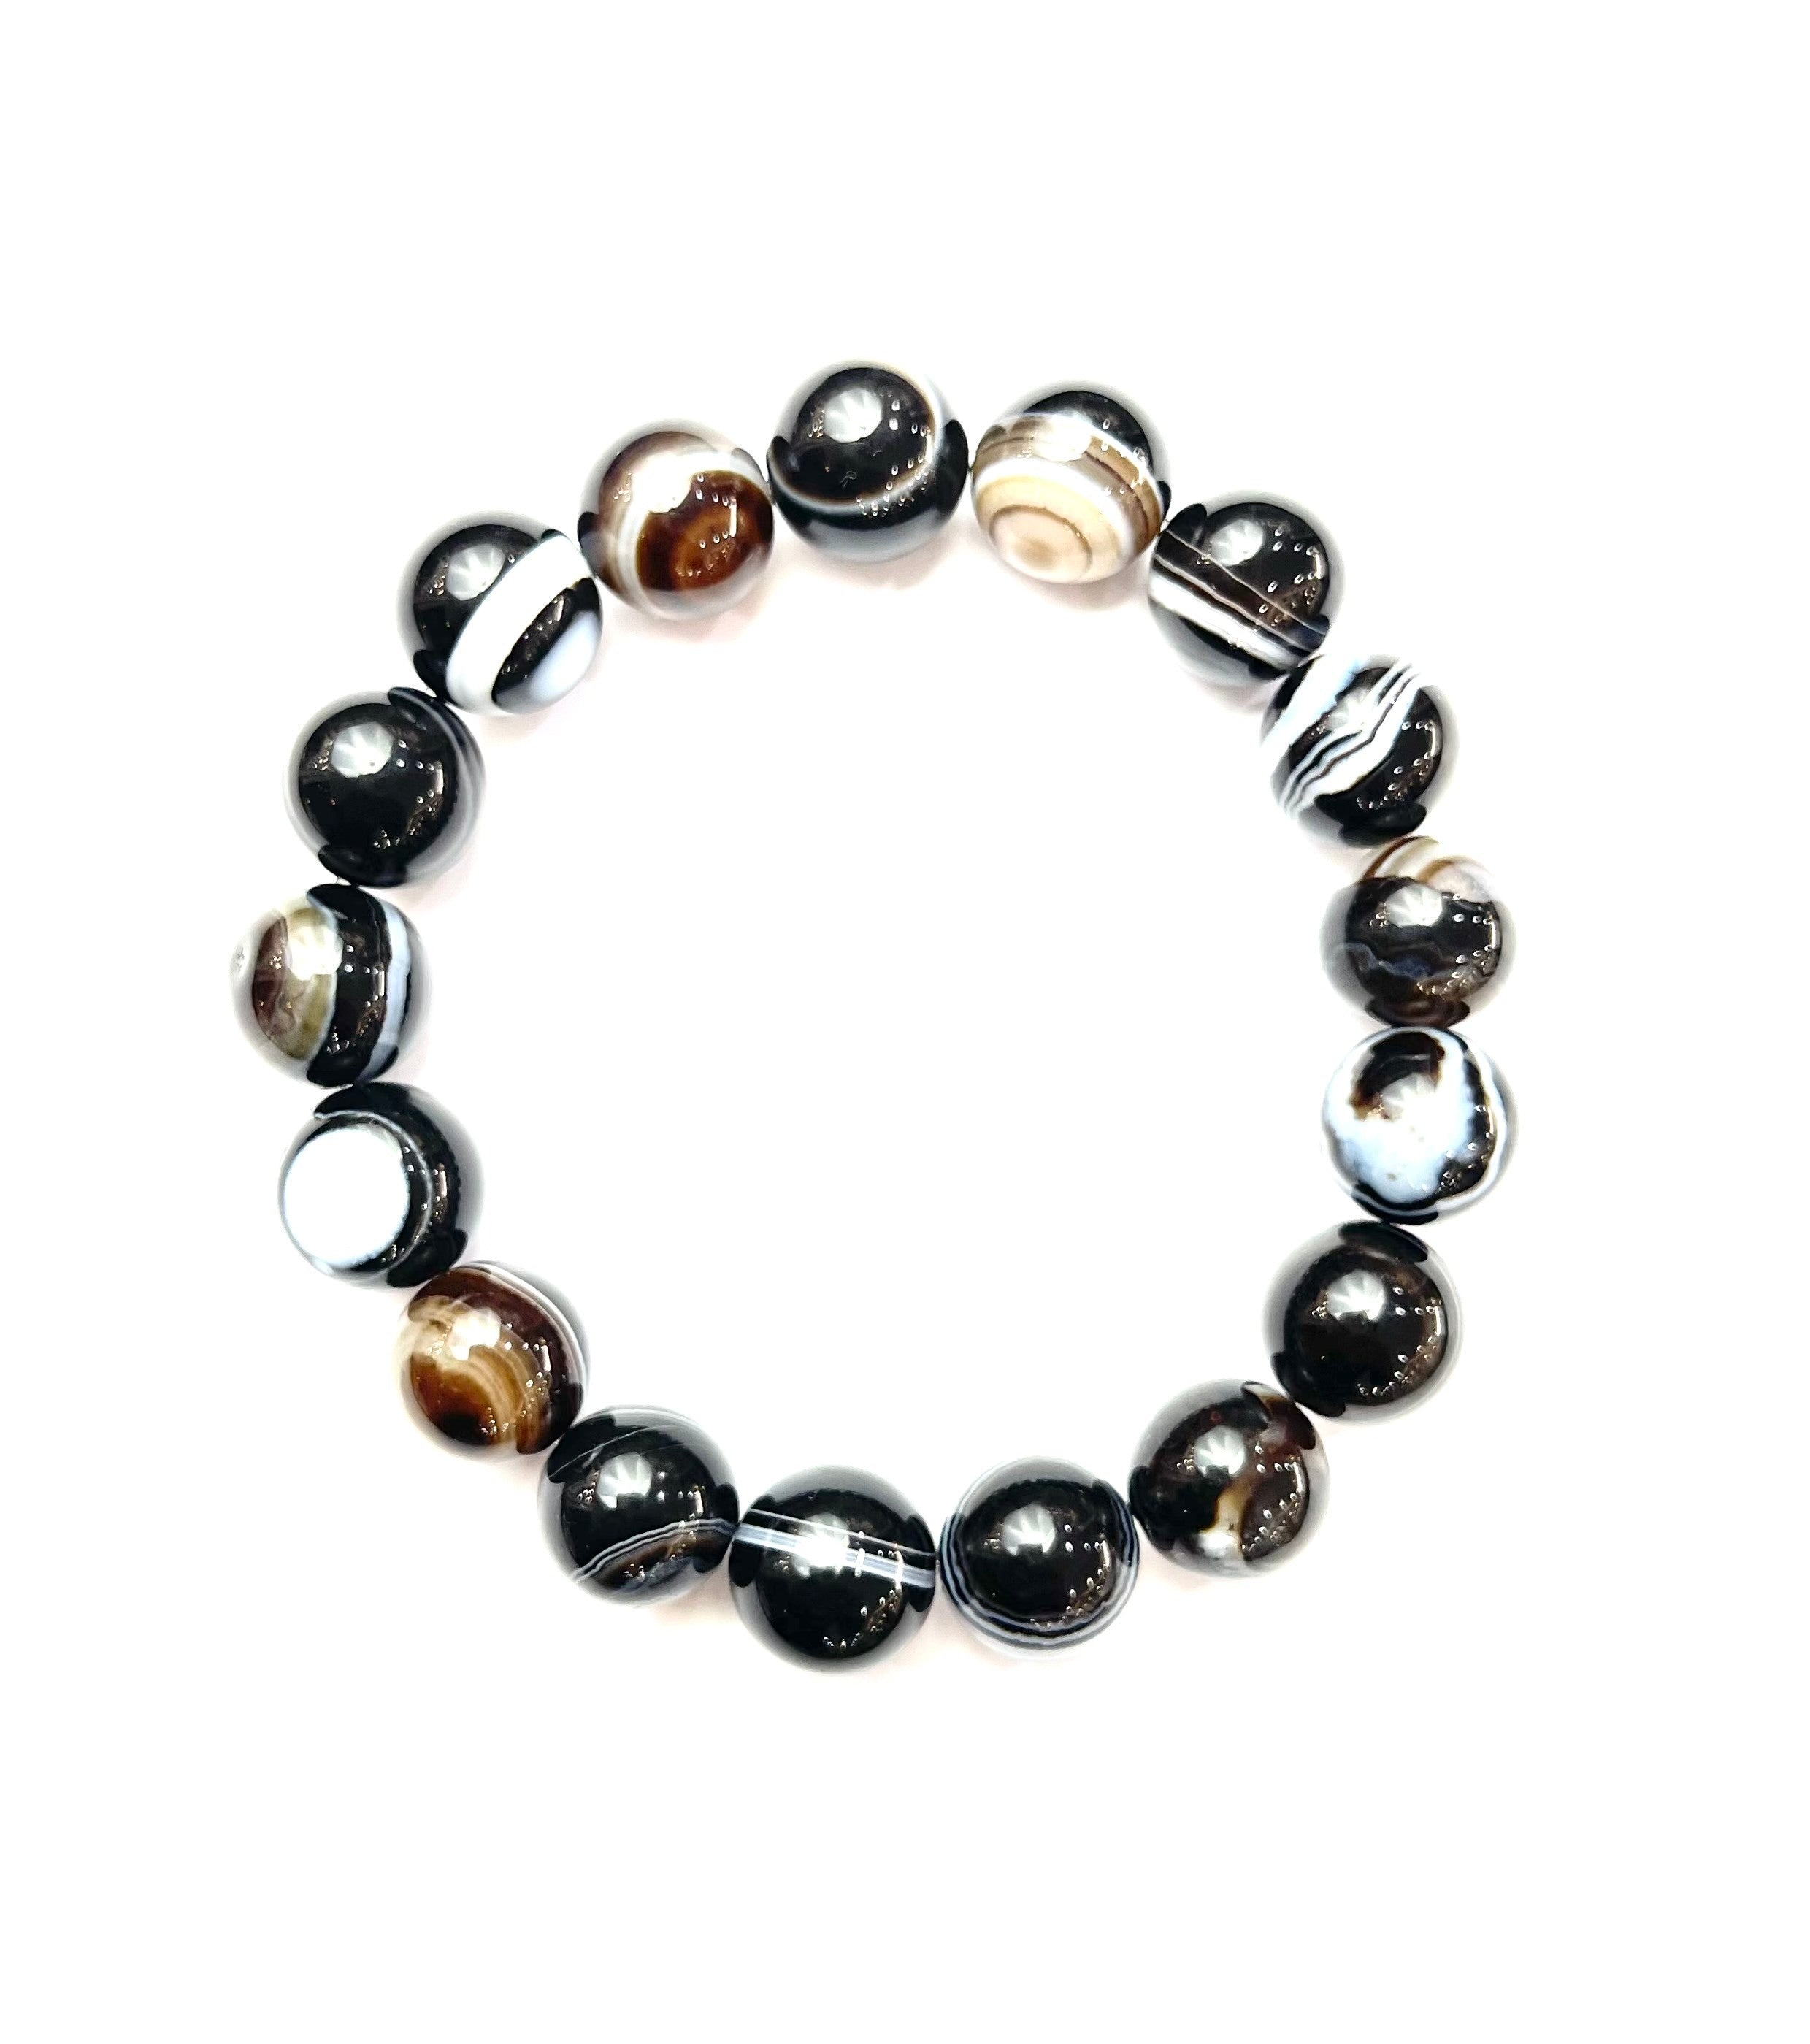 Black Agate and Gold Filled Beads, 4MM, Stretch Bracelets, Set of 8 –  Fortunoff Fine Jewelry